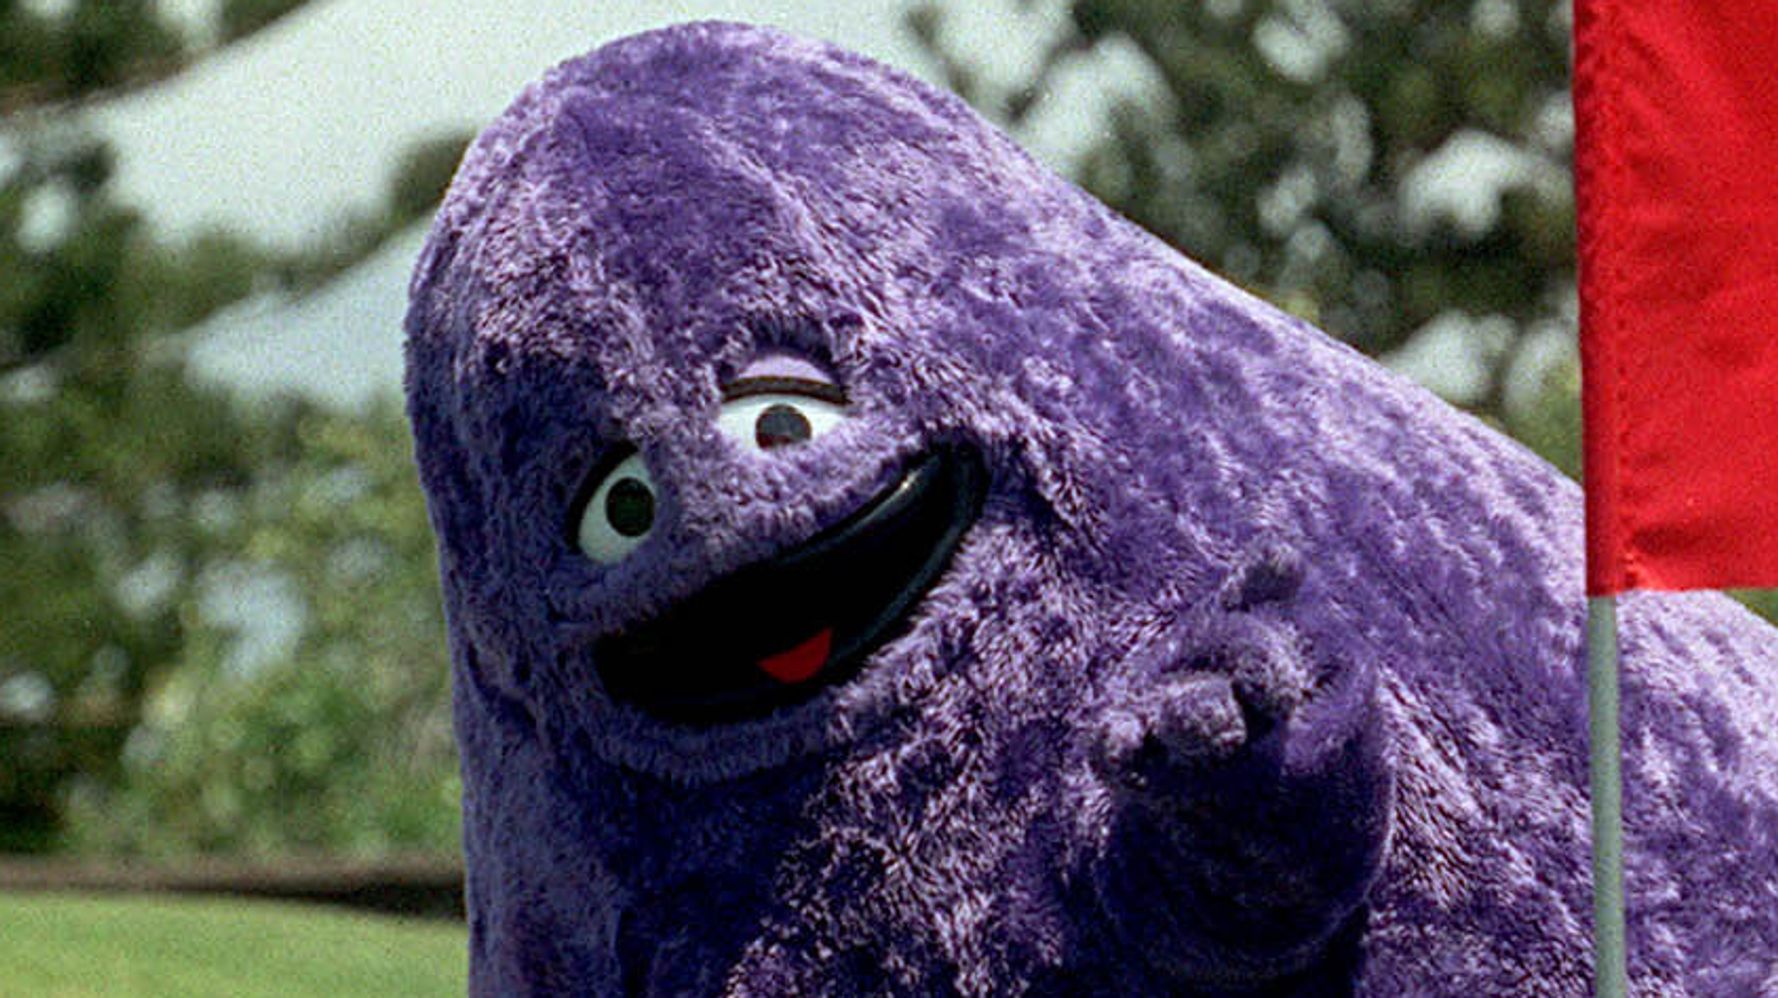 What The Heck Is Grimace Anyway? McDonald’s Manager’s Answer Has People Shook